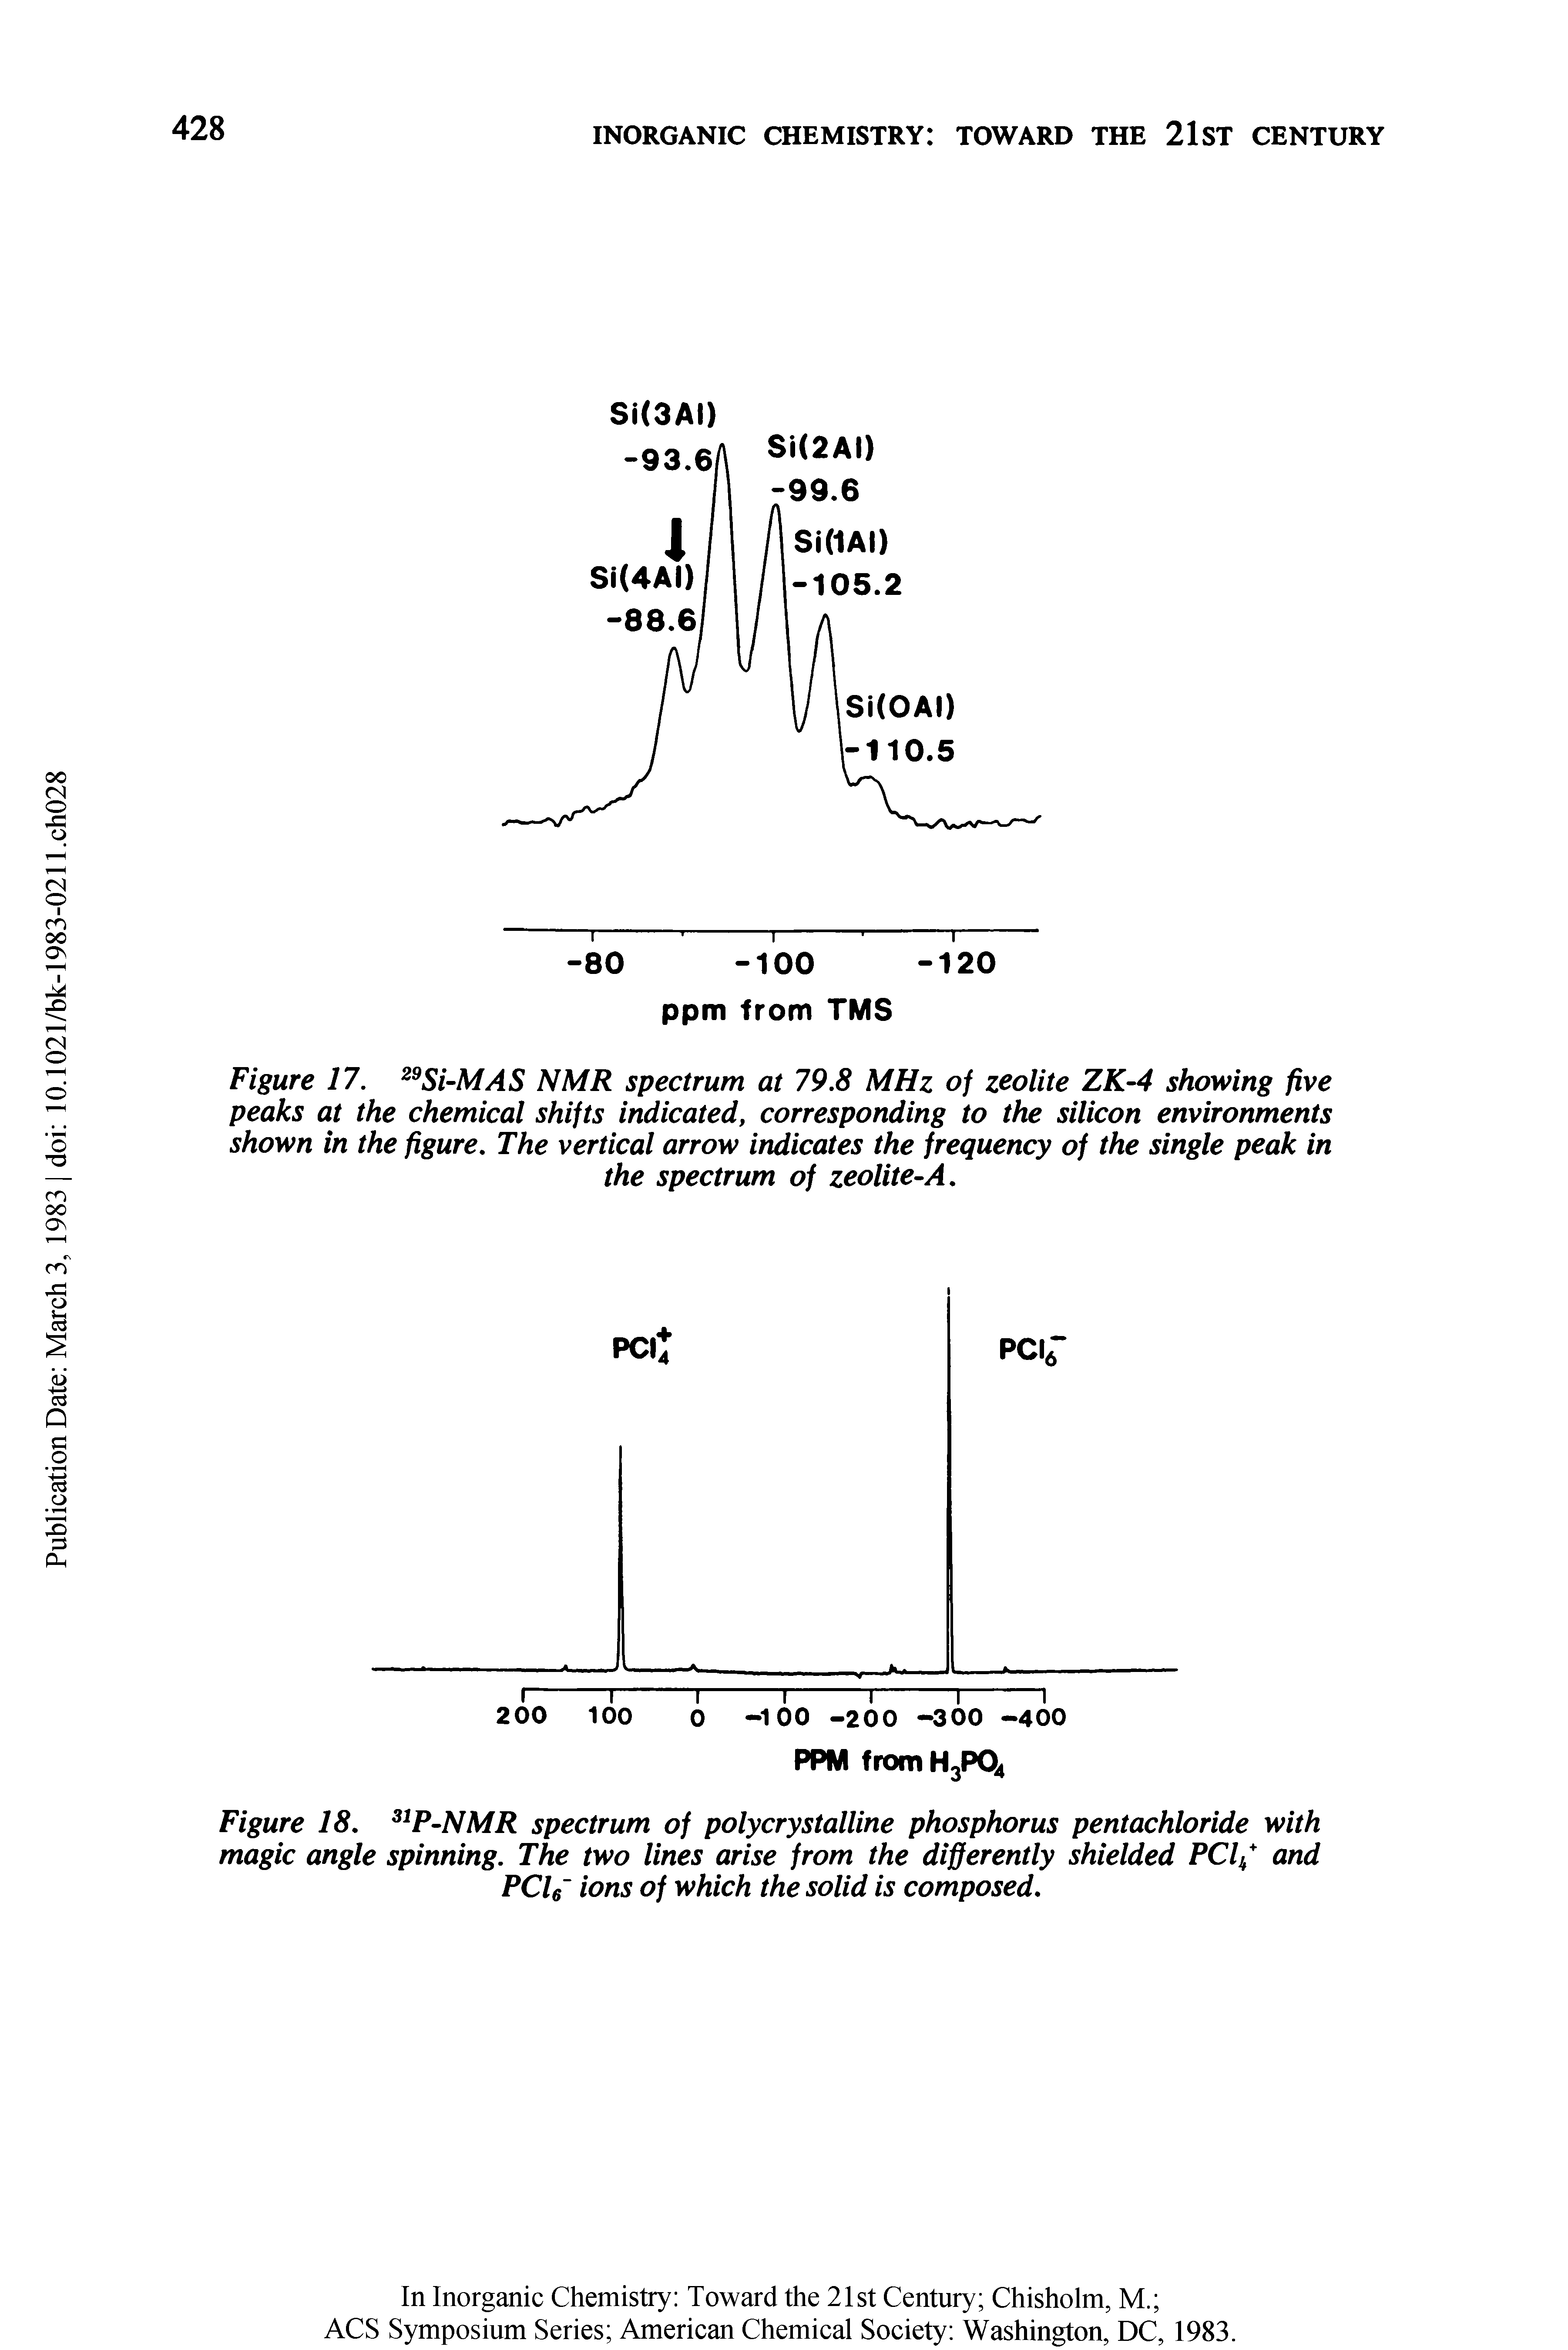 Figure 17. 29Si-MAS NMR spectrum at 79.8 MHz of zeolite ZK-4 showing five peaks at the chemical shifts indicated, corresponding to the silicon environments shown in the figure. The vertical arrow indicates the frequency of the single peak in the spectrum of zeolite-A,...